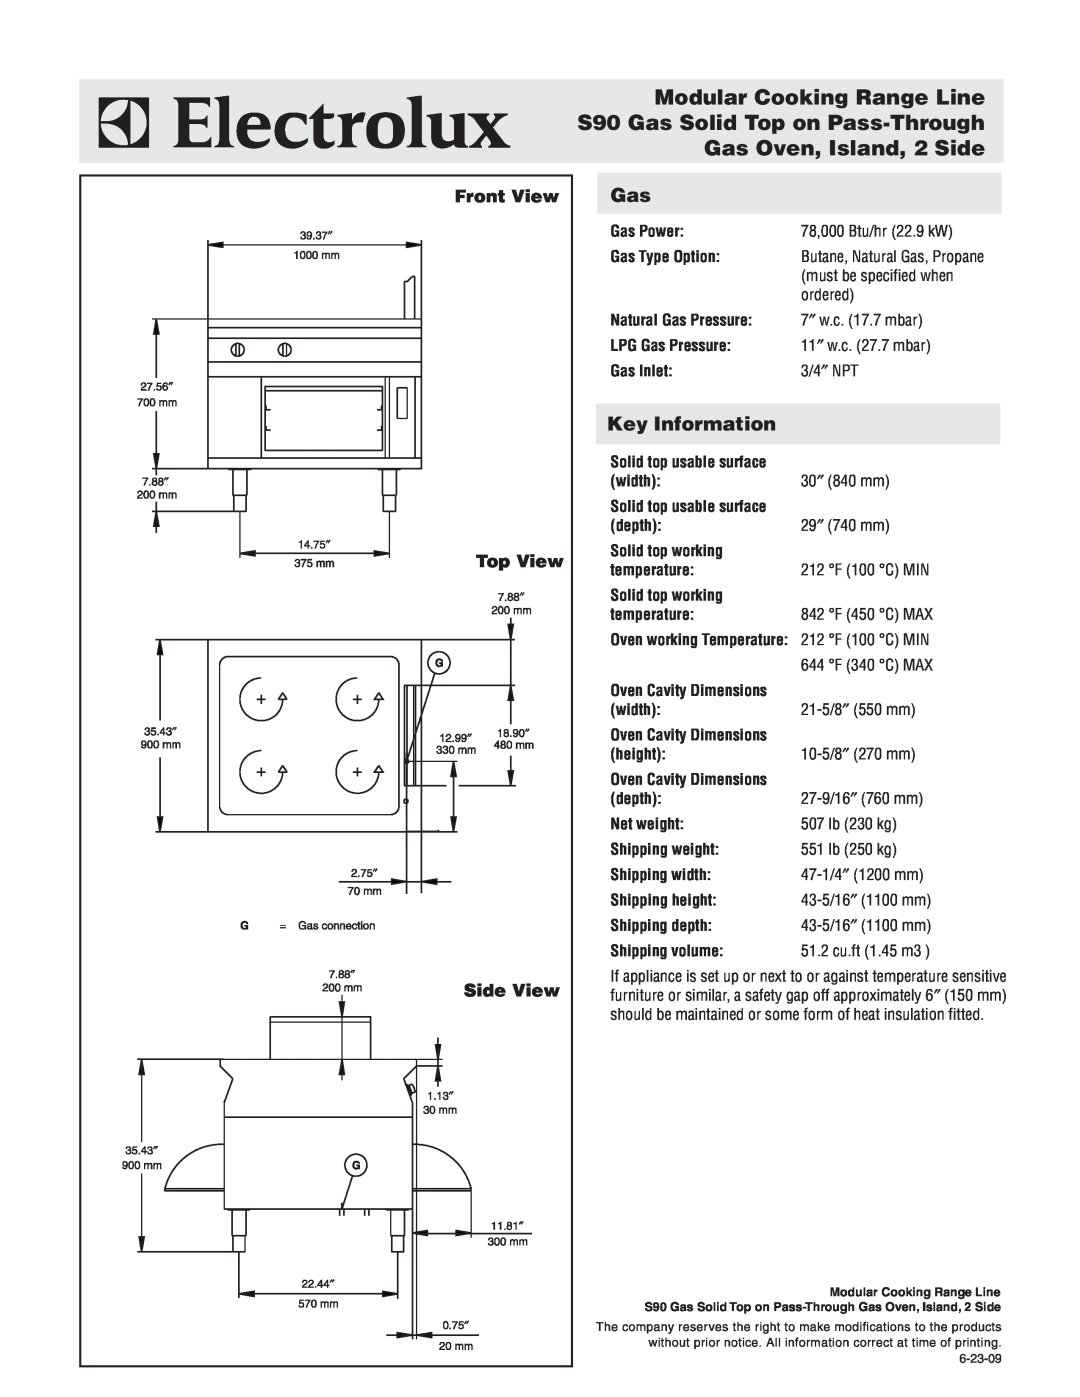 Electrolux 584163 Front View, Top View, Side View, Key Information, 78,000 Btu/hr 22.9 kW, must be specified when, ordered 